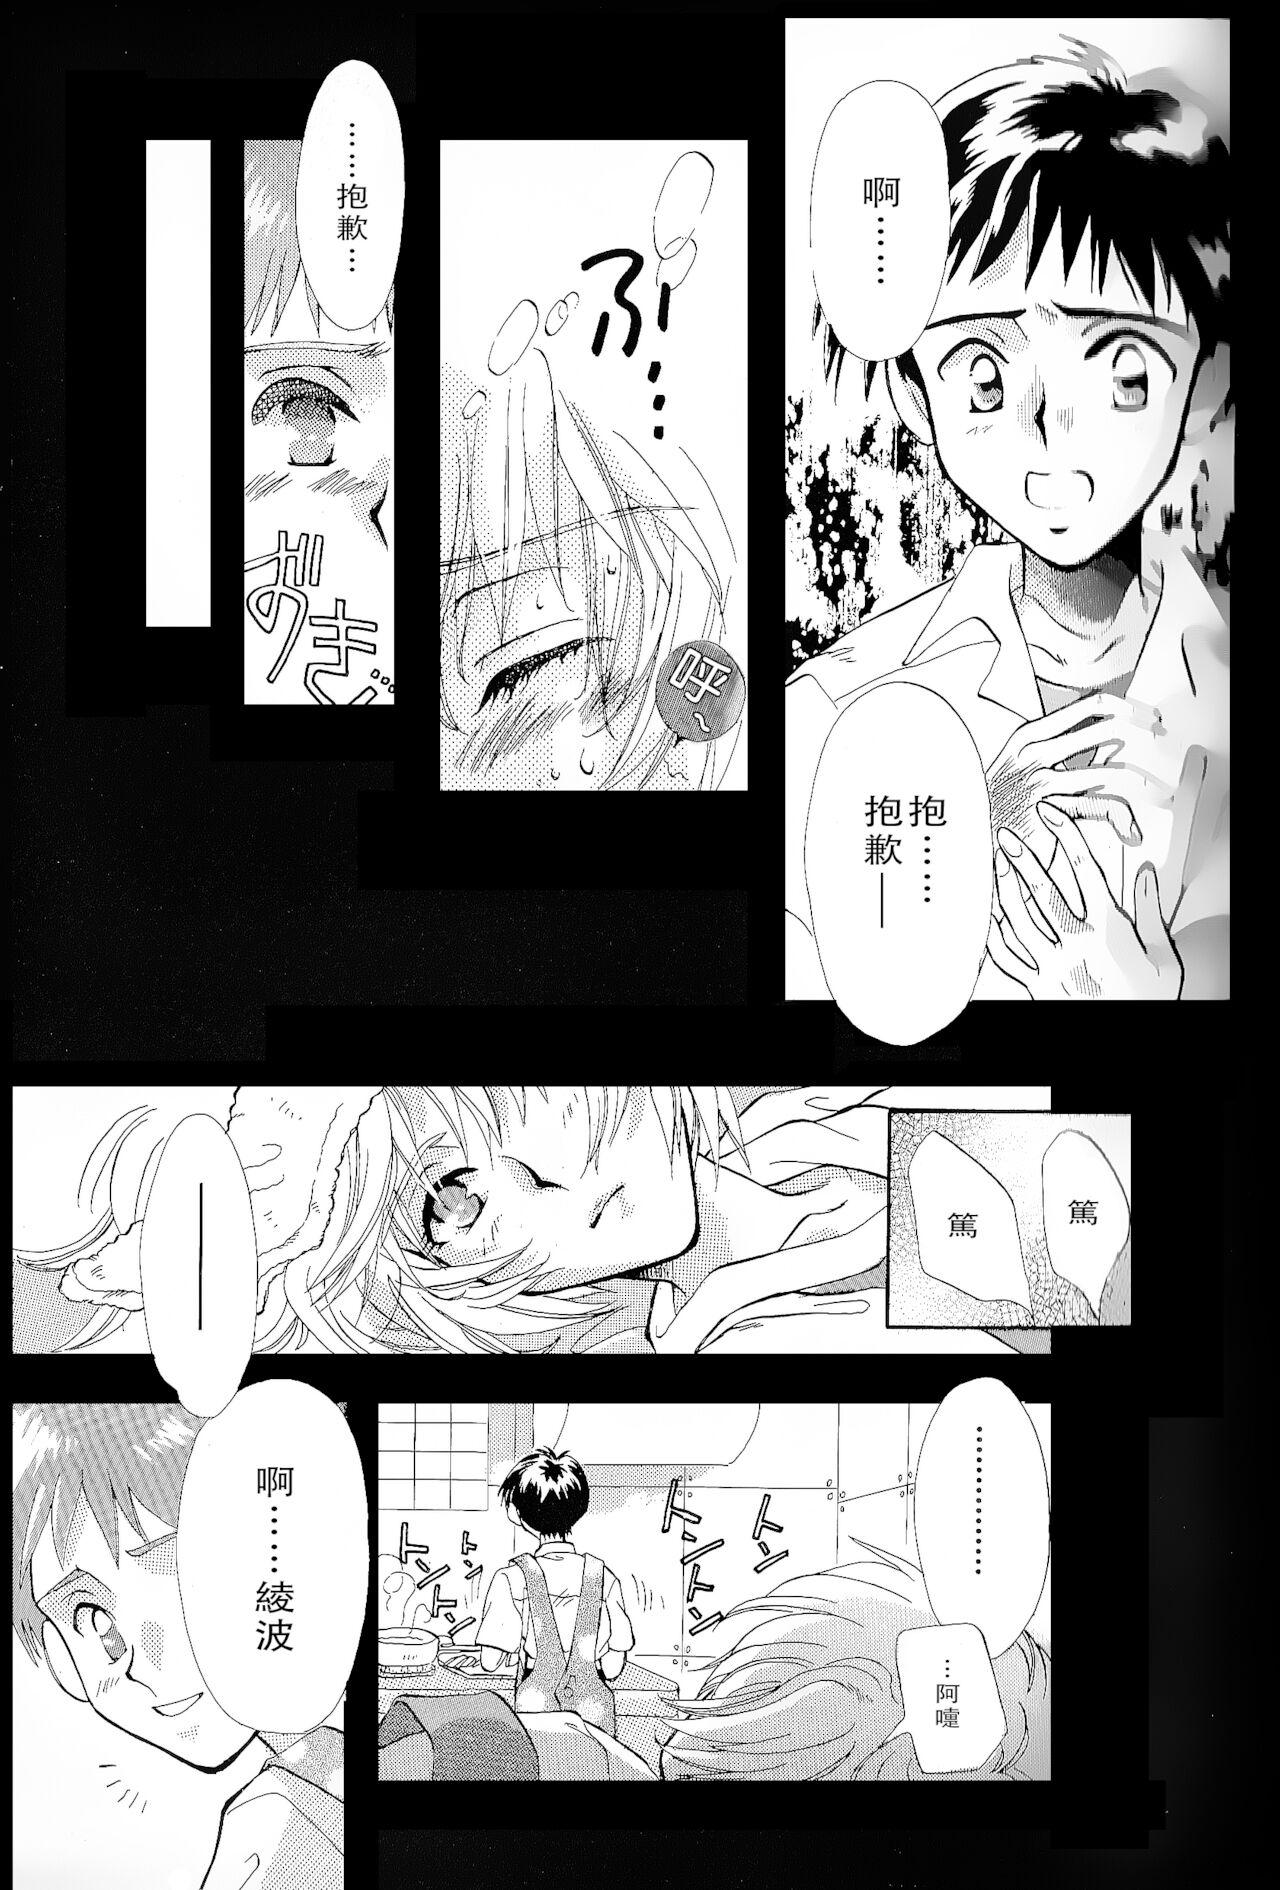 The PEPPY ANGEL episode0.1 - Neon genesis evangelion Pure 18 - Page 8